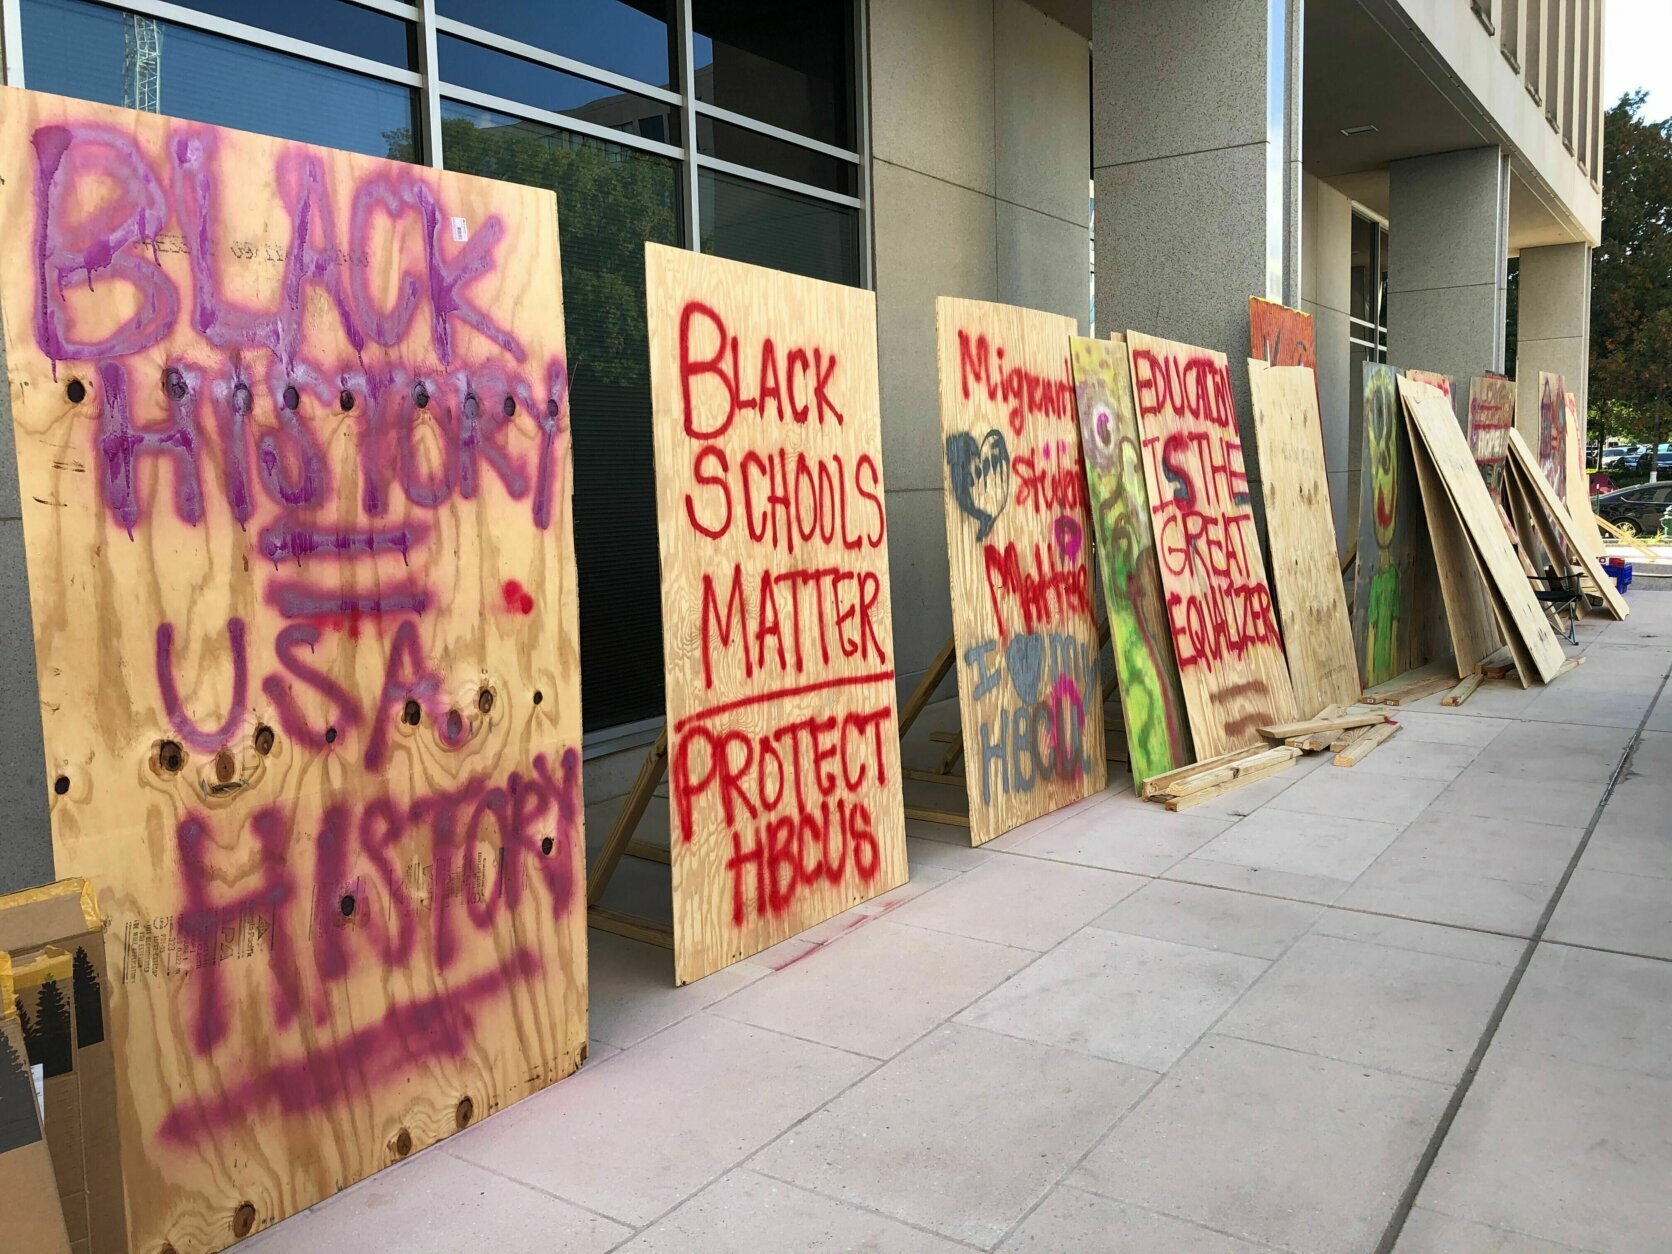 The art for the protest has been put on display by demonstrators who say they will occupy the area outside the Department of Education building in D.C. until their demands are met.